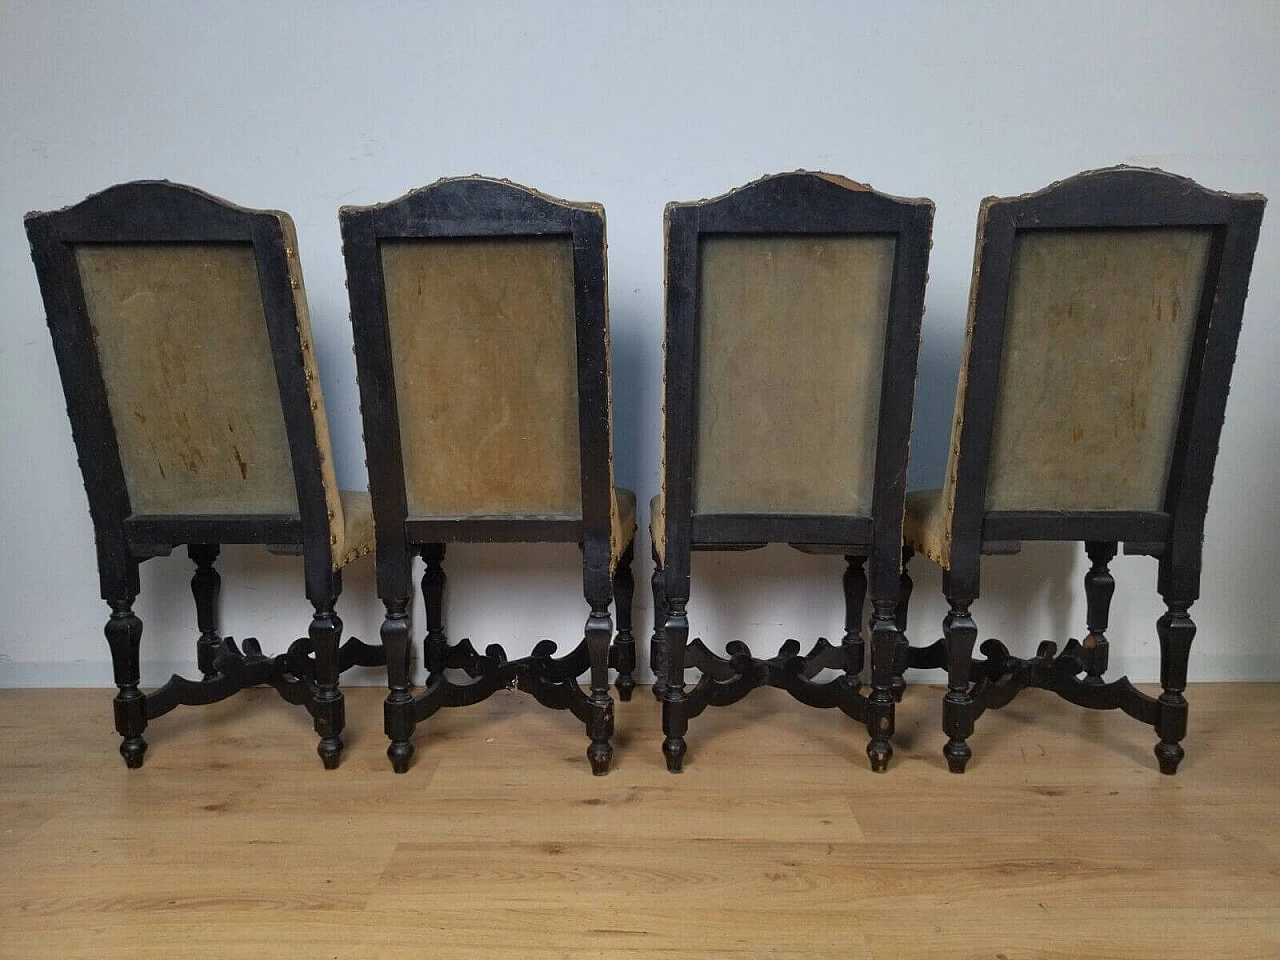 4 Rocchetto chairs in ebonised wood, 18th century 12